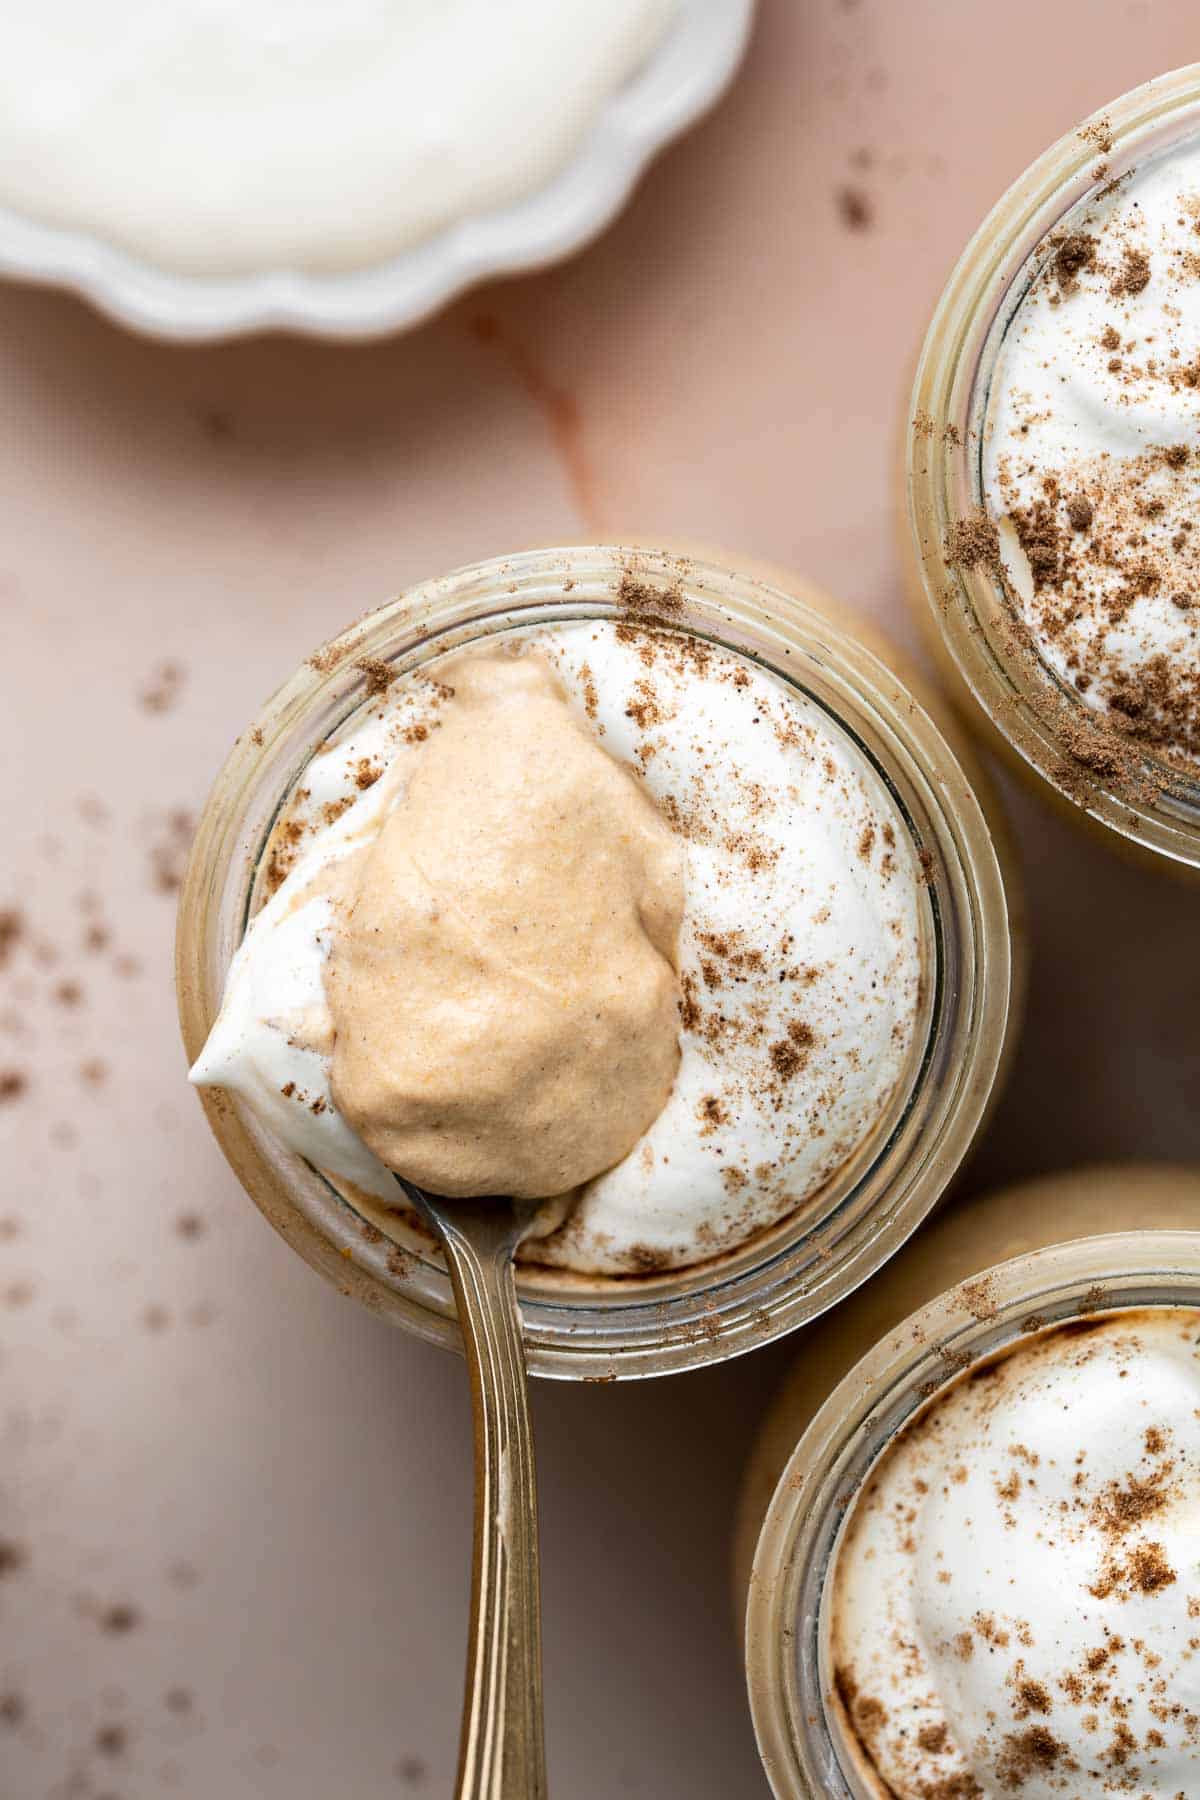 This rich, creamy pumpkin mousse is a fall dessert favorite. It’s beginner-friendly, no bake, and easy to whip up in 15 minutes before ready to chill. | aheadofthyme.com